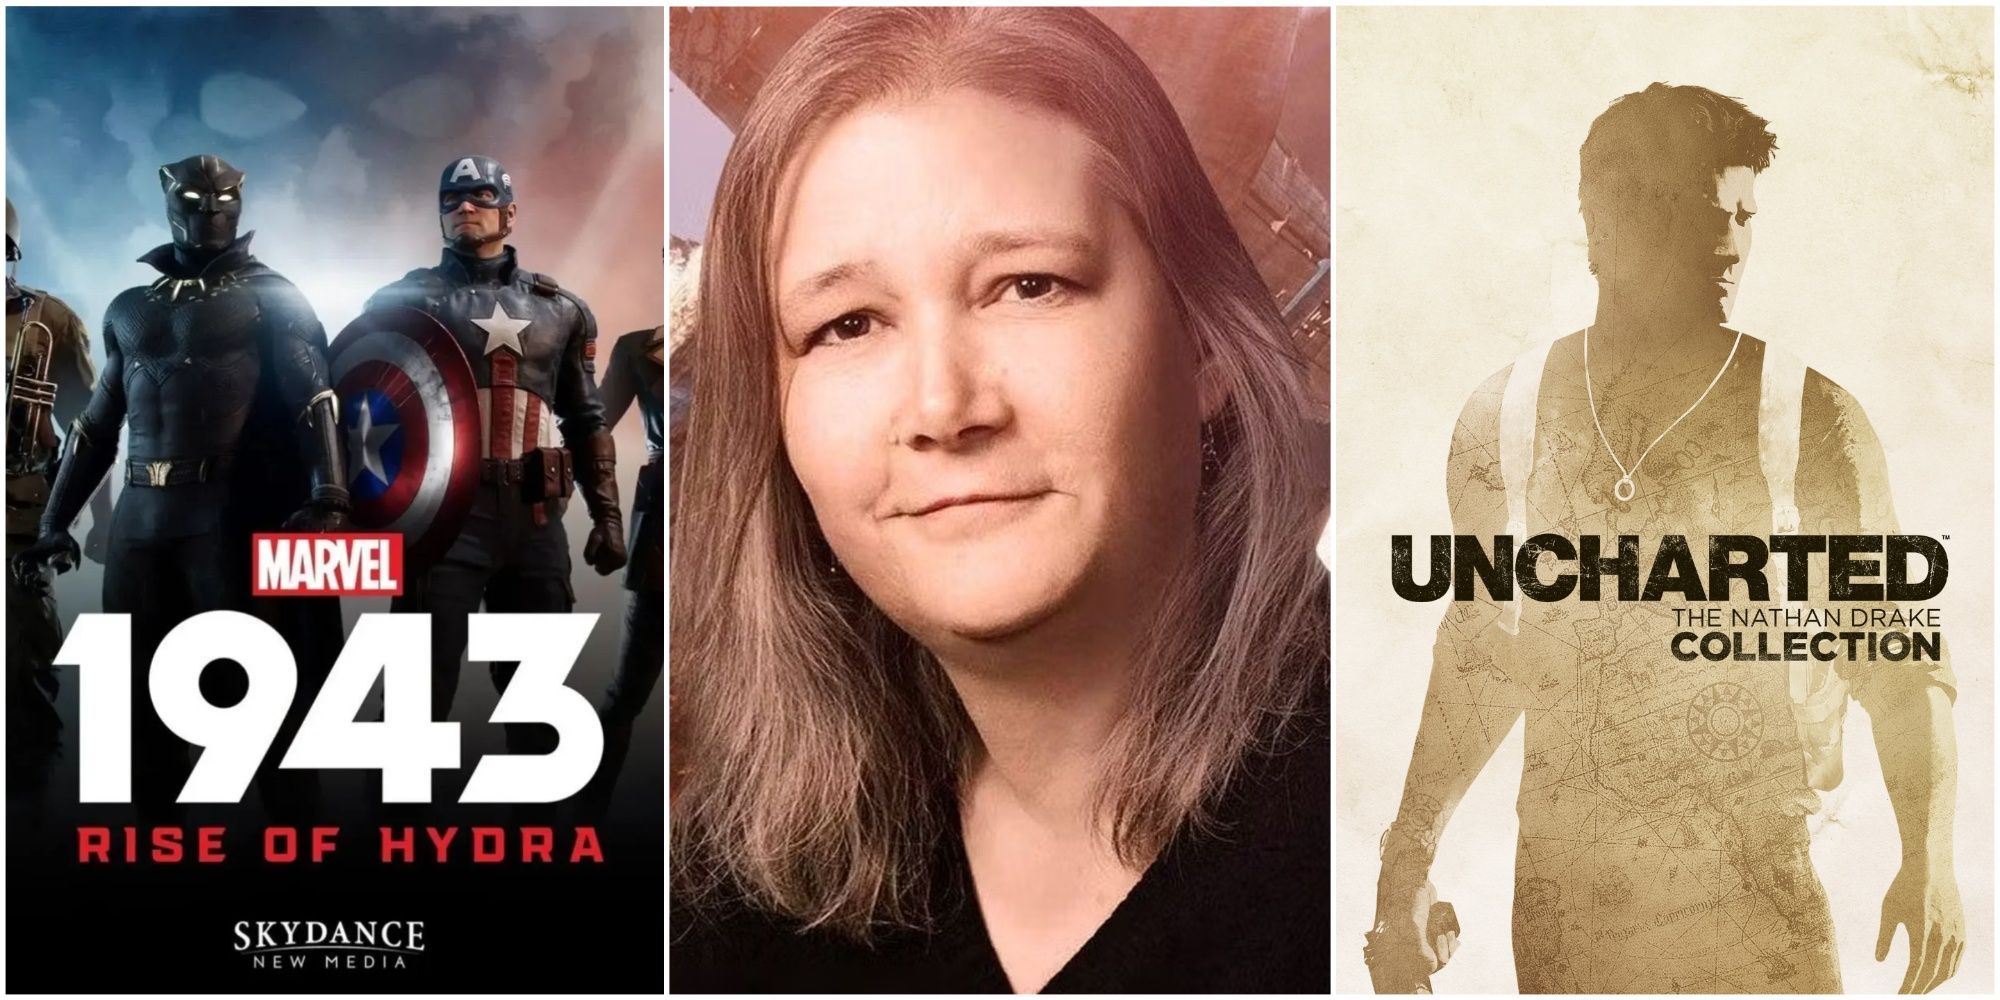 Amy Hennig Uncharted Collection Marvel 1943 